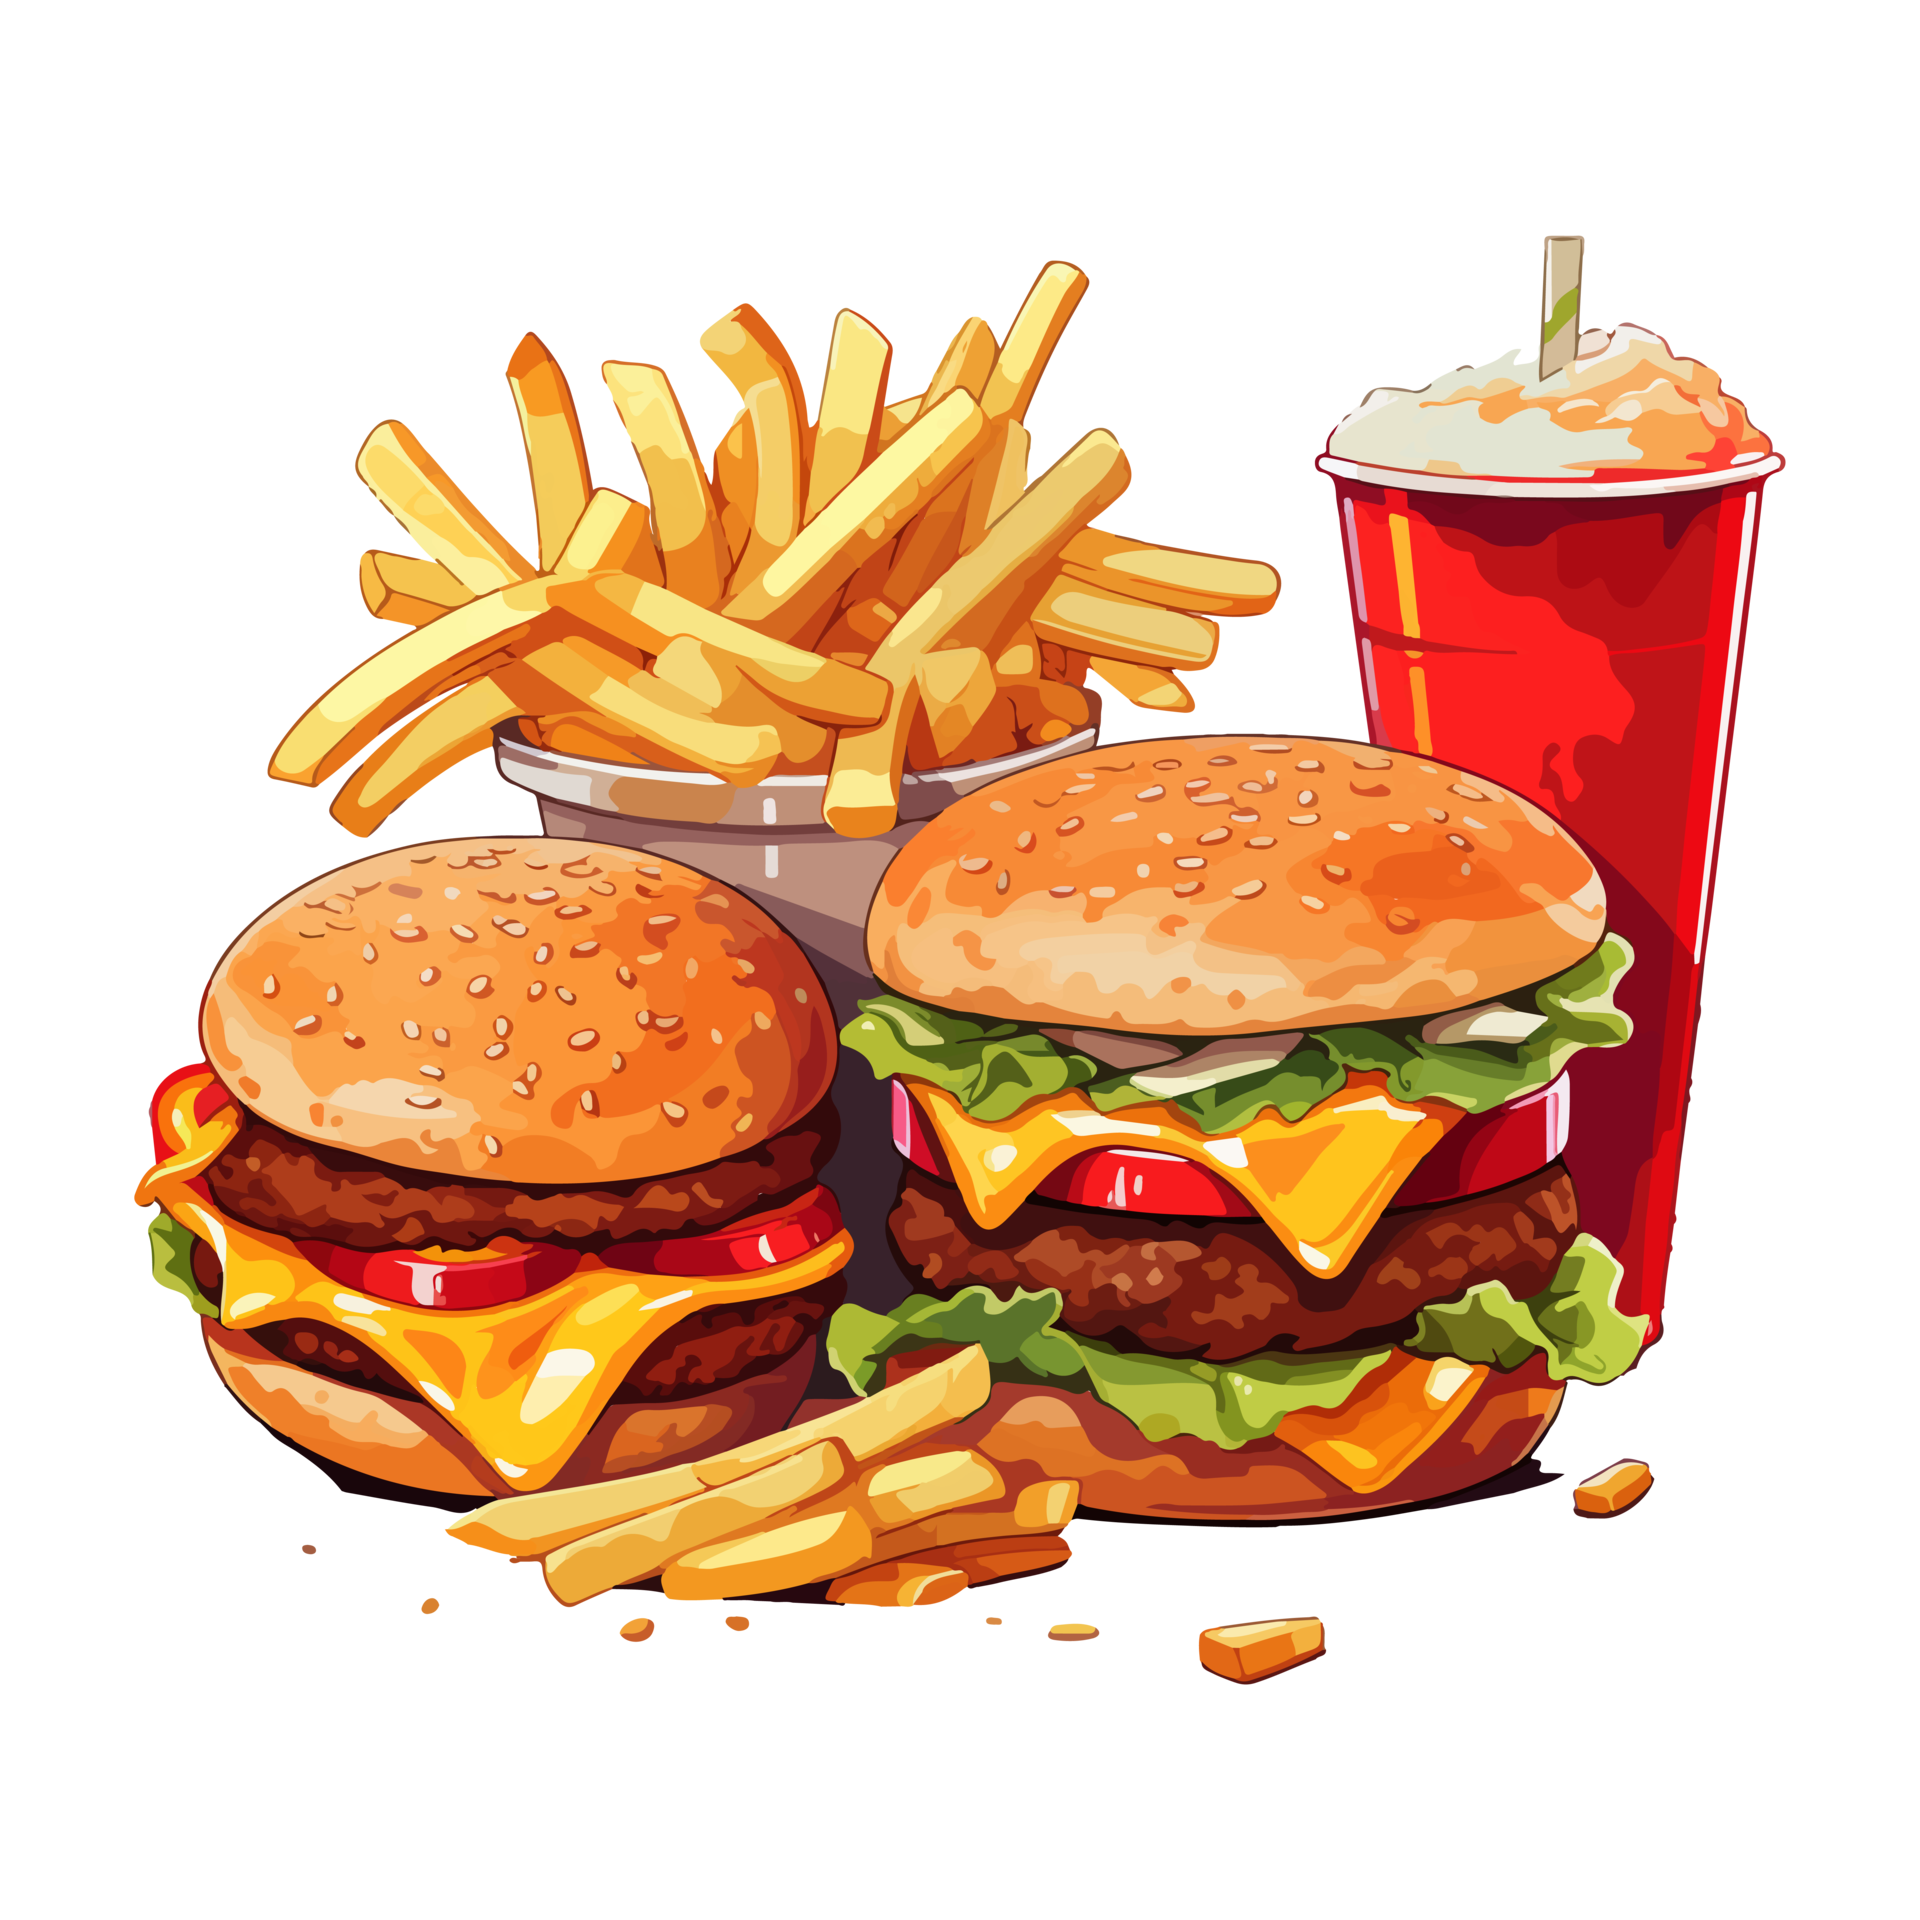 fast food png